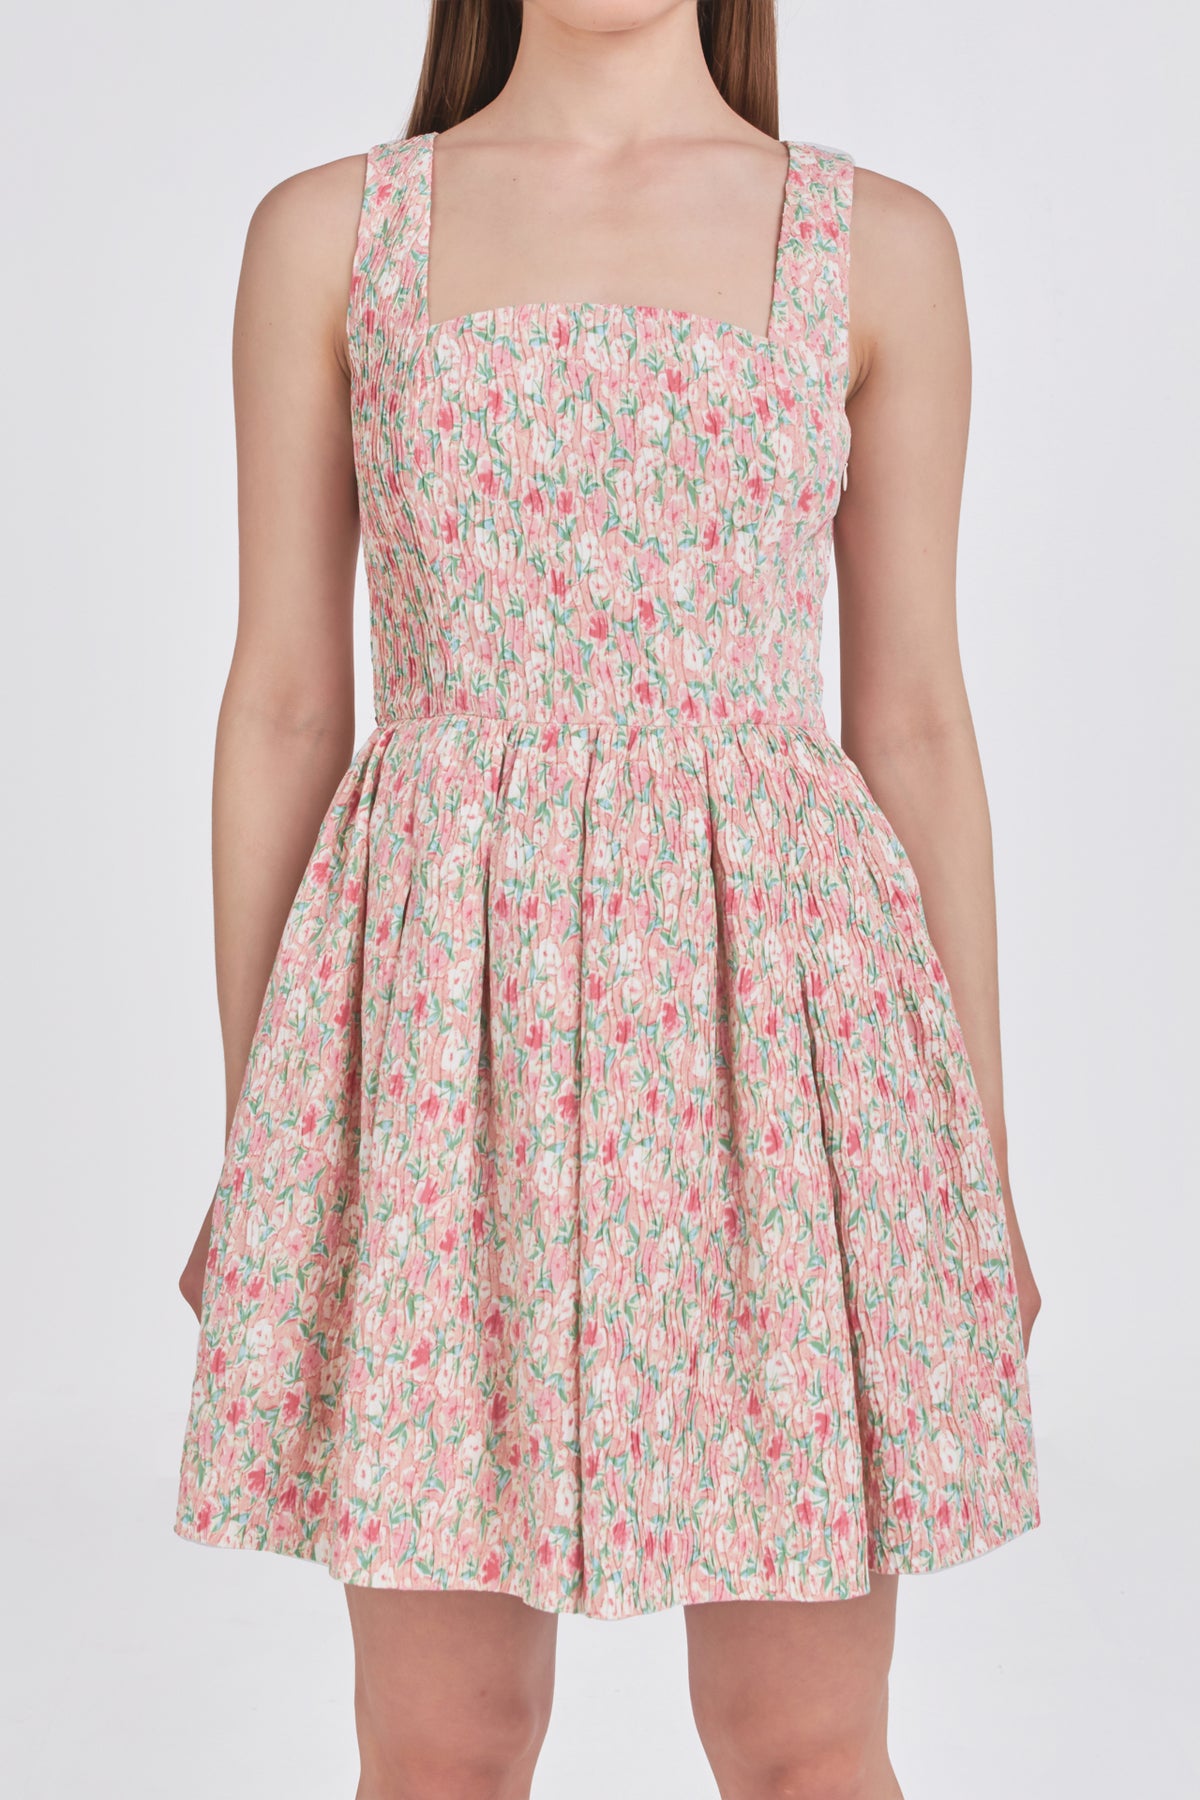 ENDLESS ROSE - Floral Textured Bow Tie Mini Dress - DRESSES available at Objectrare